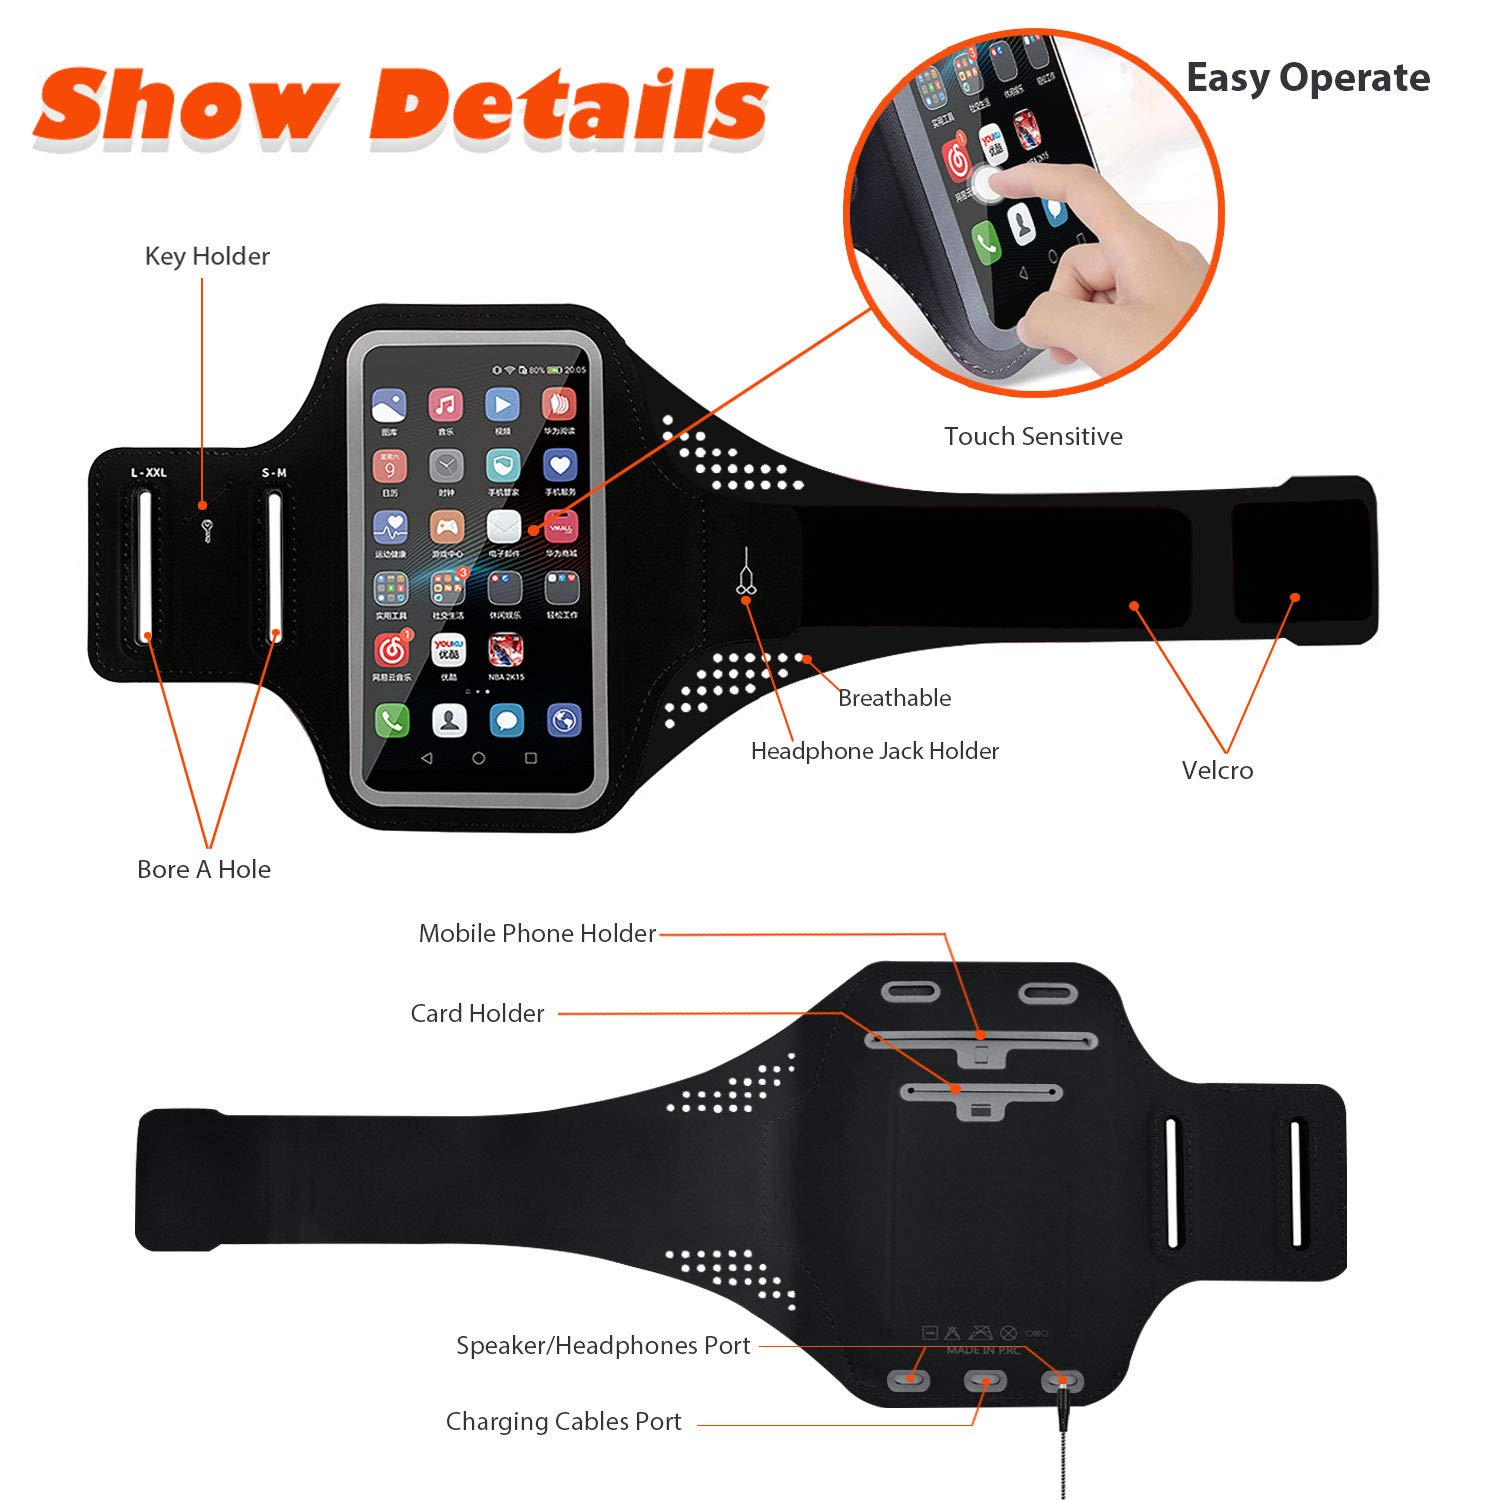 MOVOYEE Phone Holder for Running Armband Cell Phone Holder for iPhone Armband 11 12 13 14 15 Pro Max XS X XR 10 8 7 6s Plus SE Galaxy ID,Phone Armband Sleeve Fit Sport Exercise Workout Black Arm Band